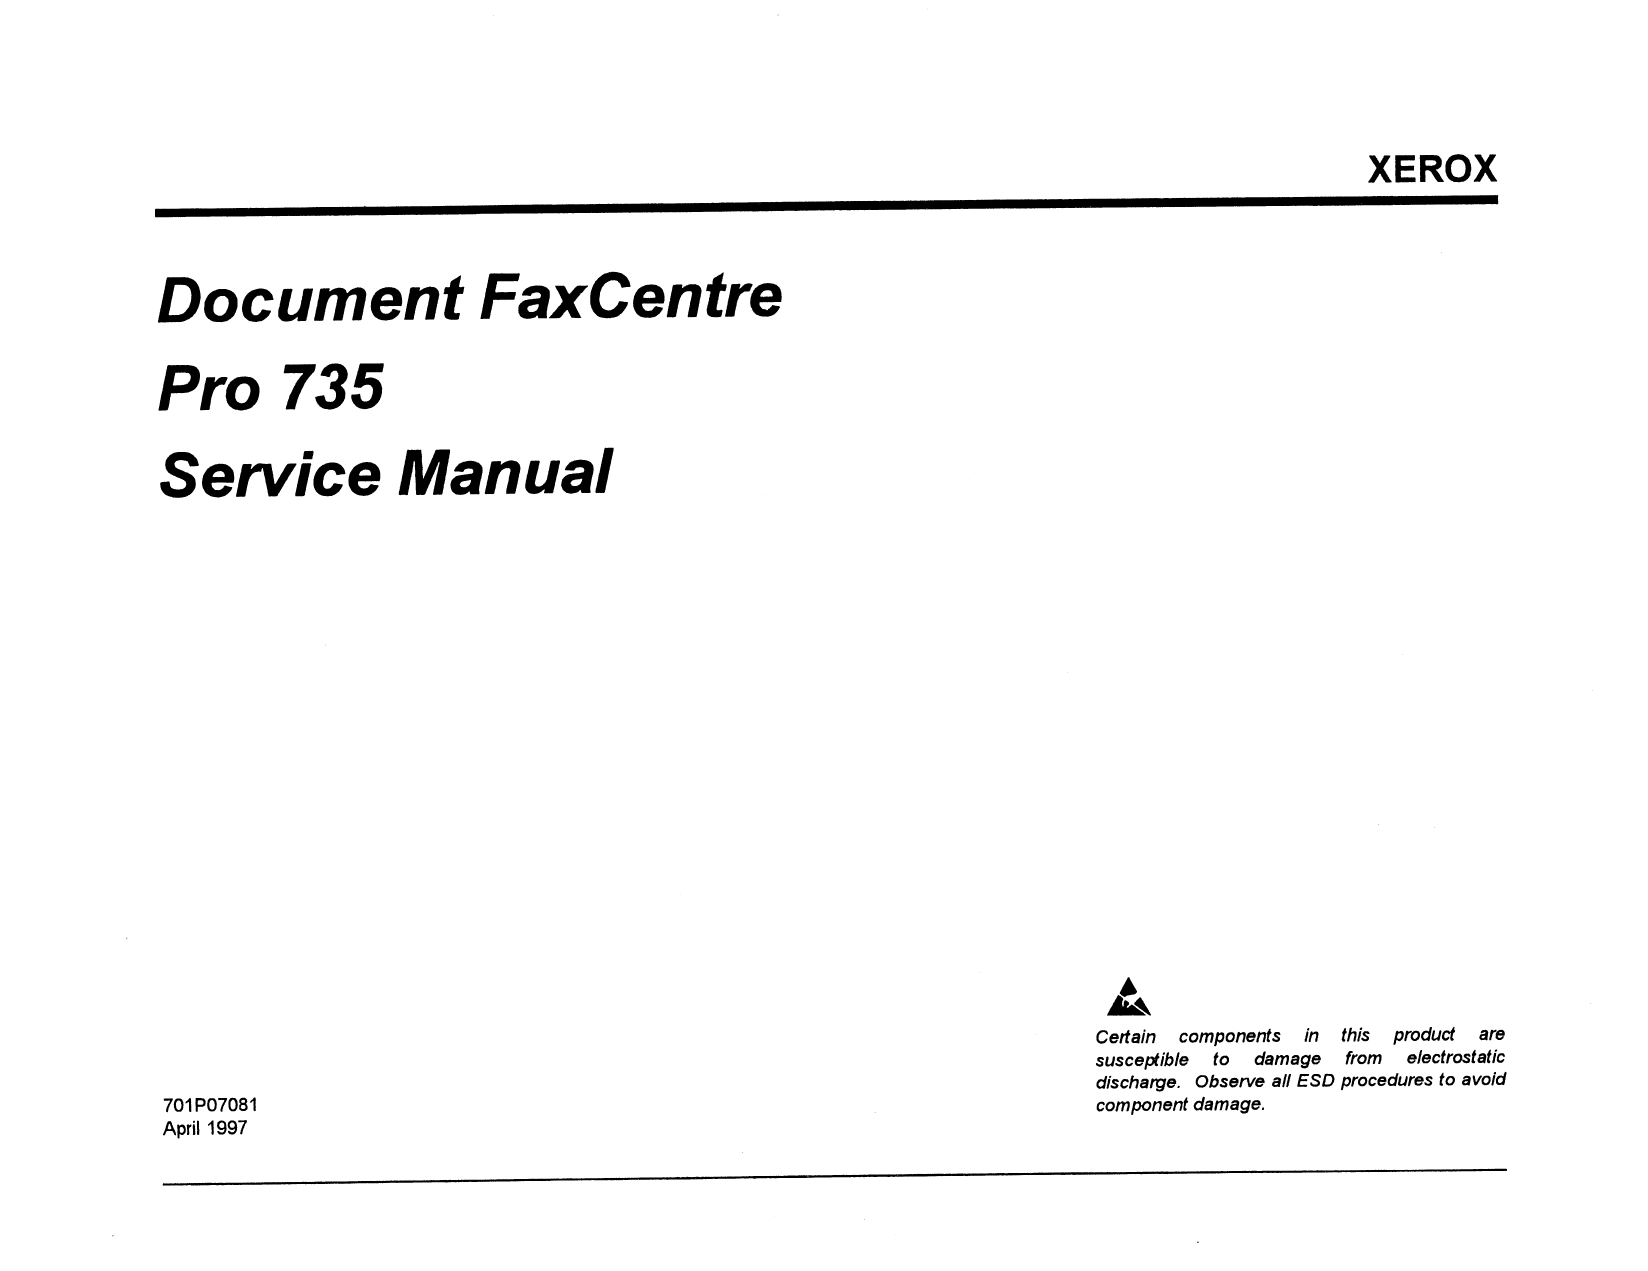 Xerox WorkCentre Pro-735 FaxCentre Parts List and Service Manual-1